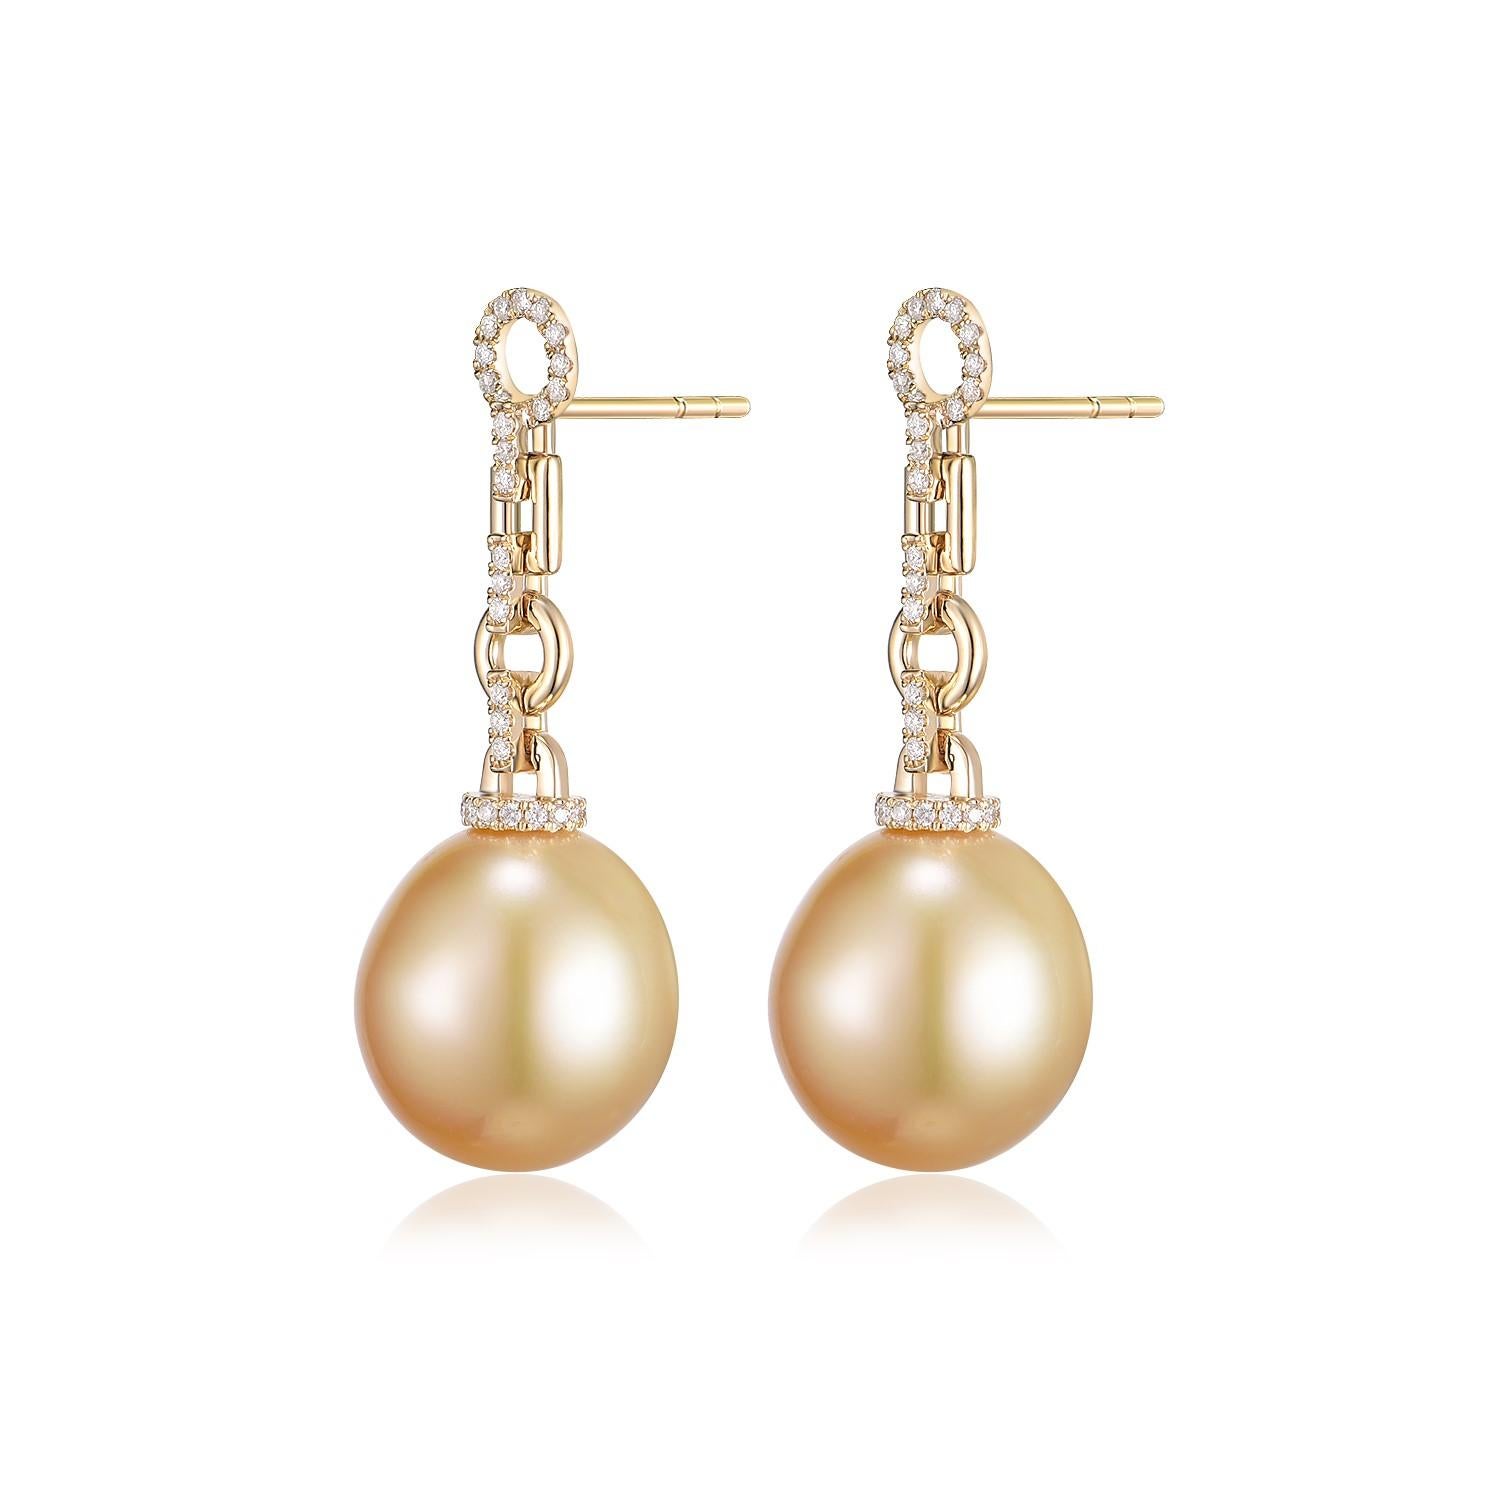 Embrace the singular beauty of these 14K yellow gold earrings, each featuring a South Sea pearl with a gentle, organic silhouette. The pearls, measuring approximately 12.5 x 14.5mm, display a lustrous golden hue. Their subtly asymmetrical shape and